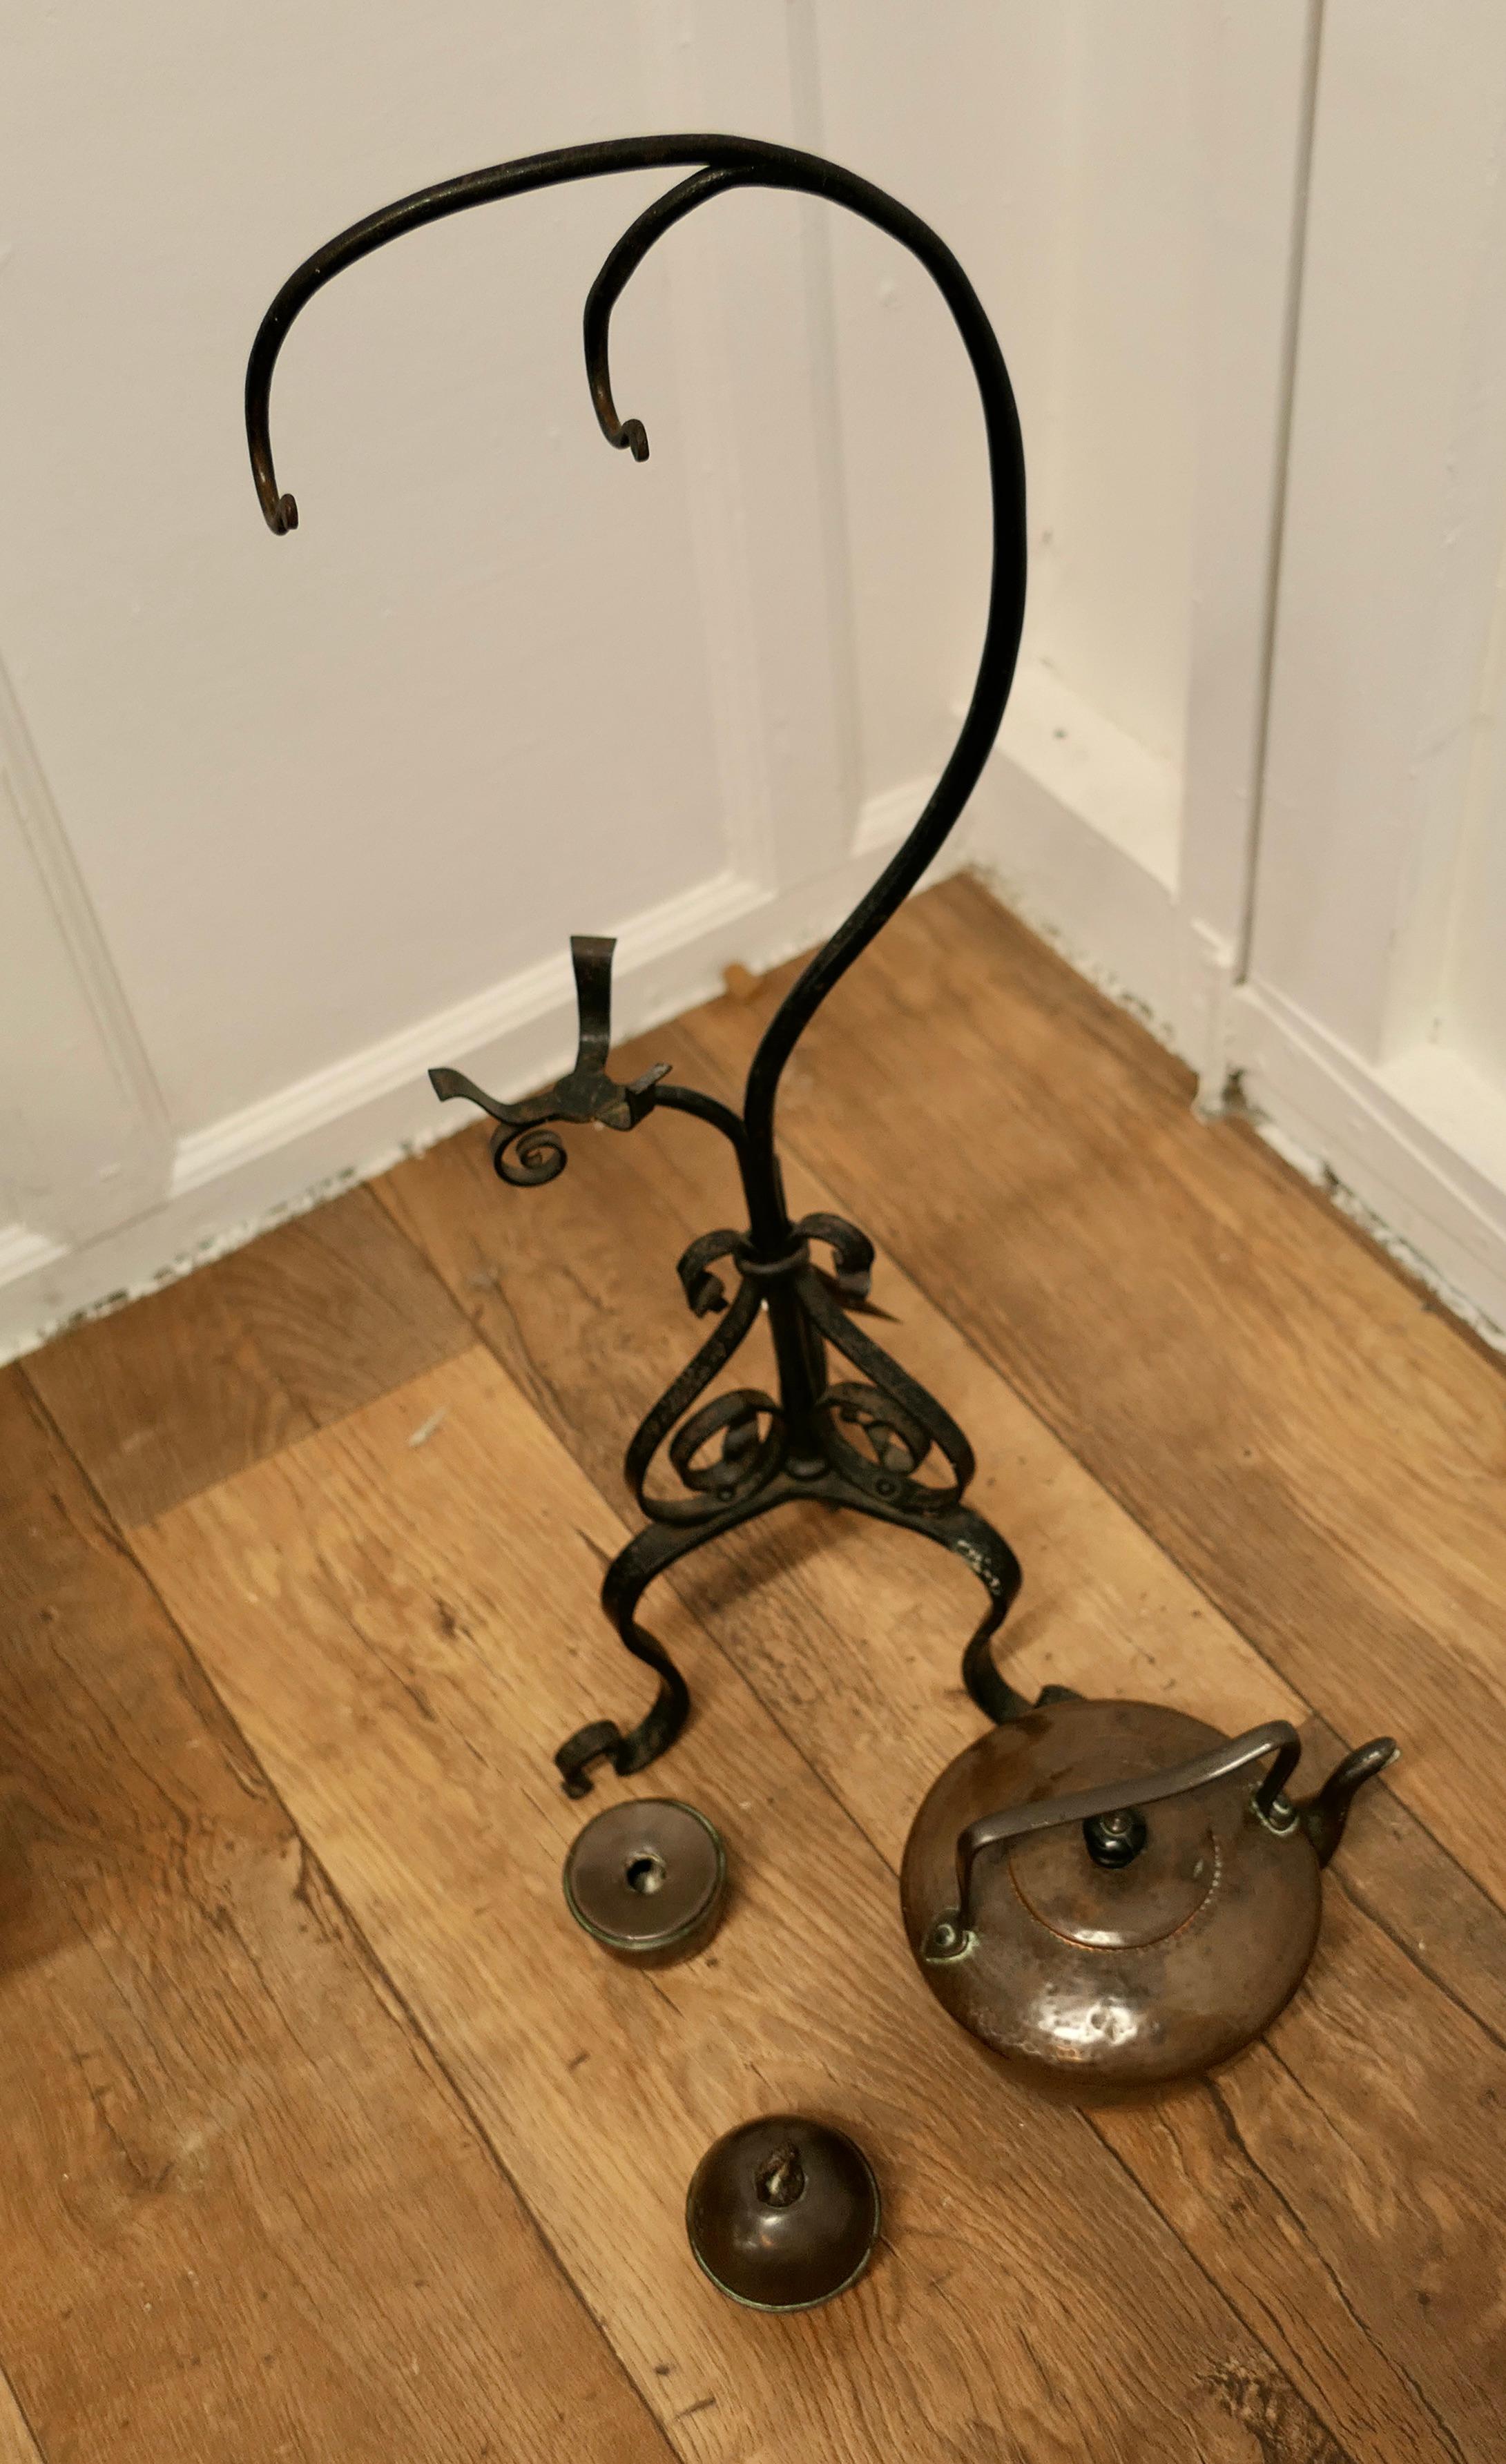 19th century Copper Swinging Sprit Kettle on a Wrought Iron stand 

This charming Arts and Crafts spirit Kettle hangs from a wrought iron stand, it has a copper spirit burner which hangs just below and a copper ball weight which is filled with